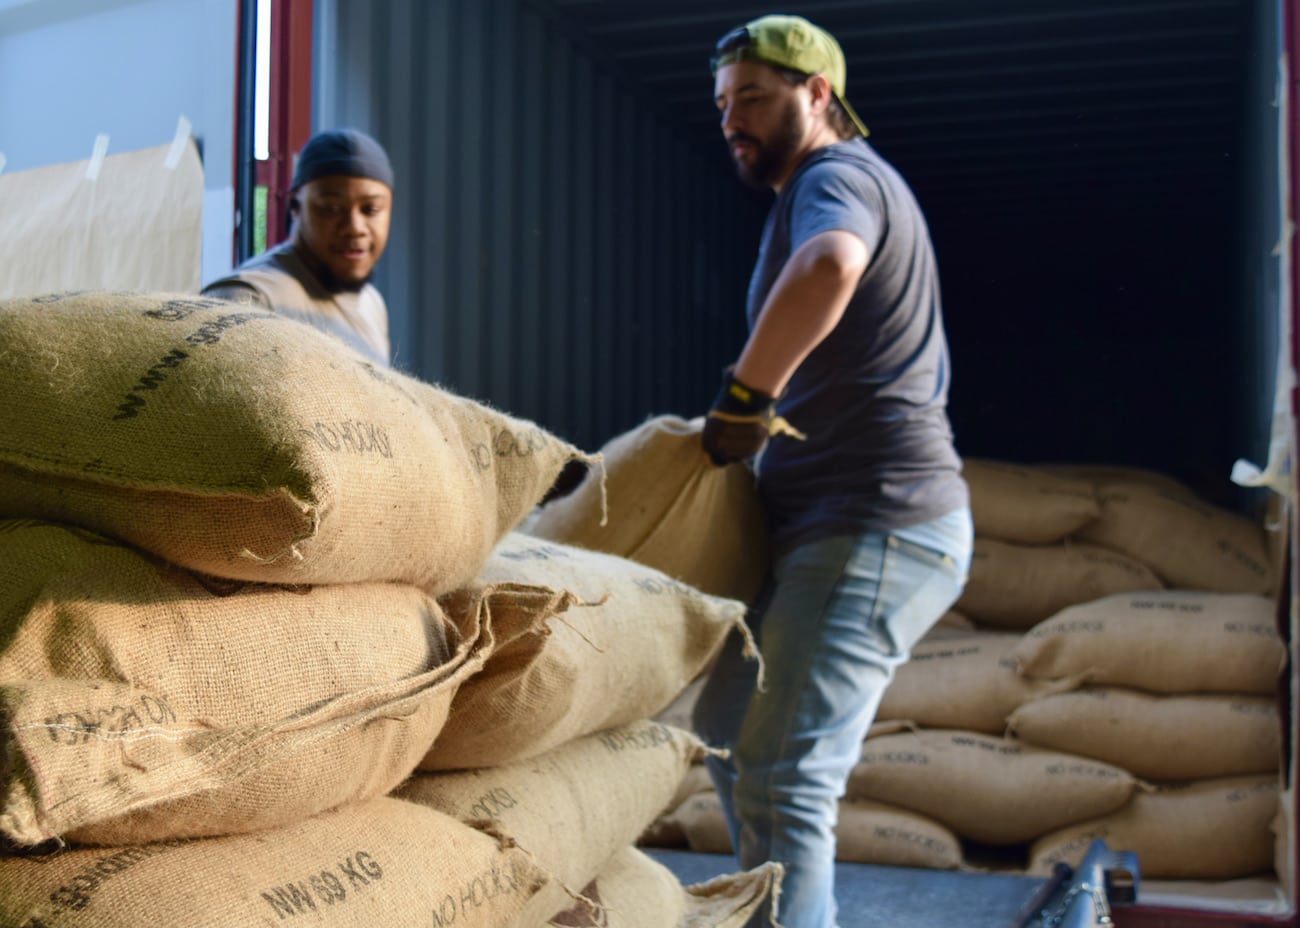 Unloading green coffee bags from a truck